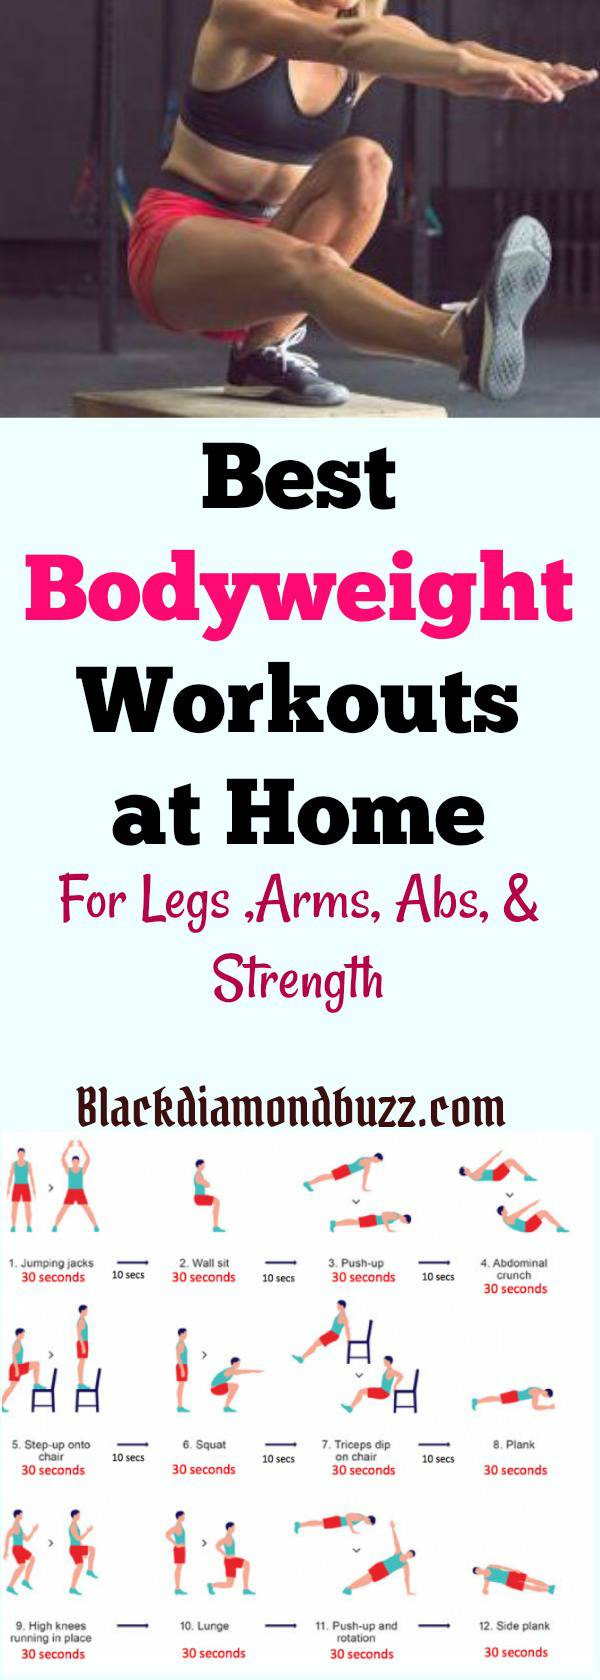 Weight Loss Exercises At Home
 7 Best Bodyweight Exercises for Weight Loss at Home For